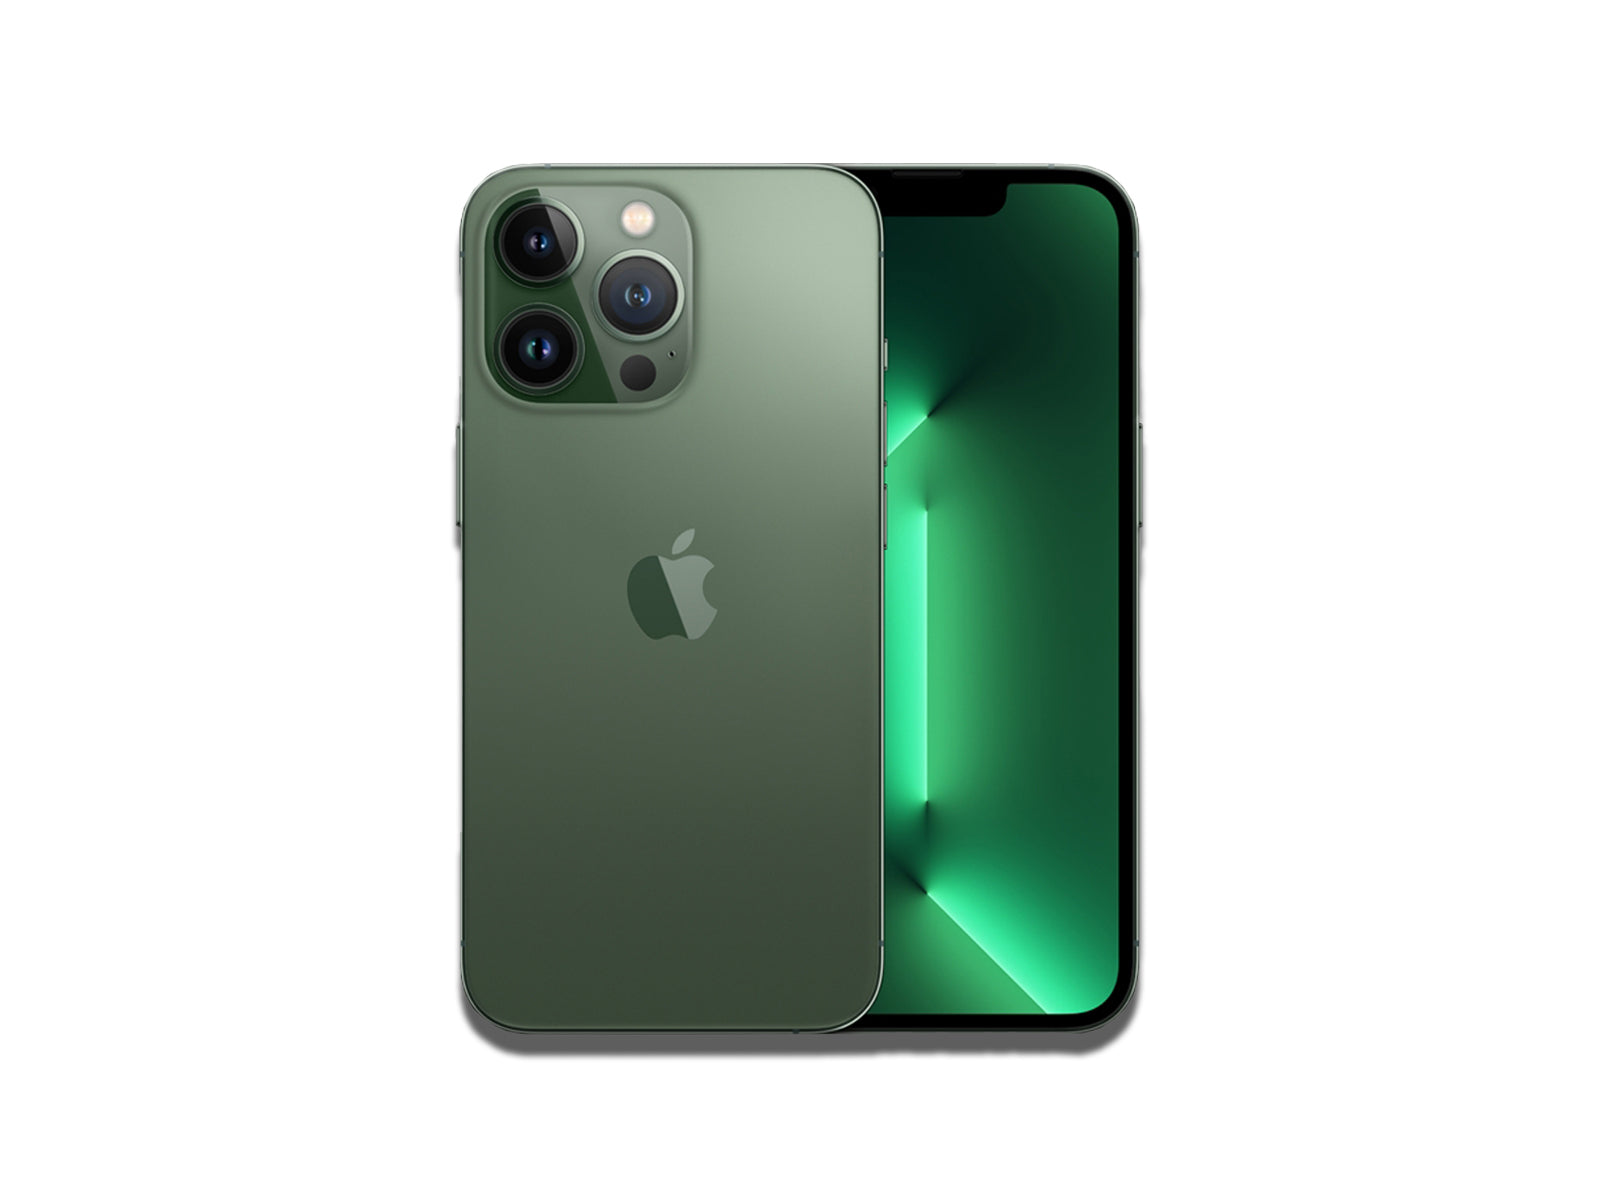 Image of the iPhone 13 Pro Alpine Green on the white background